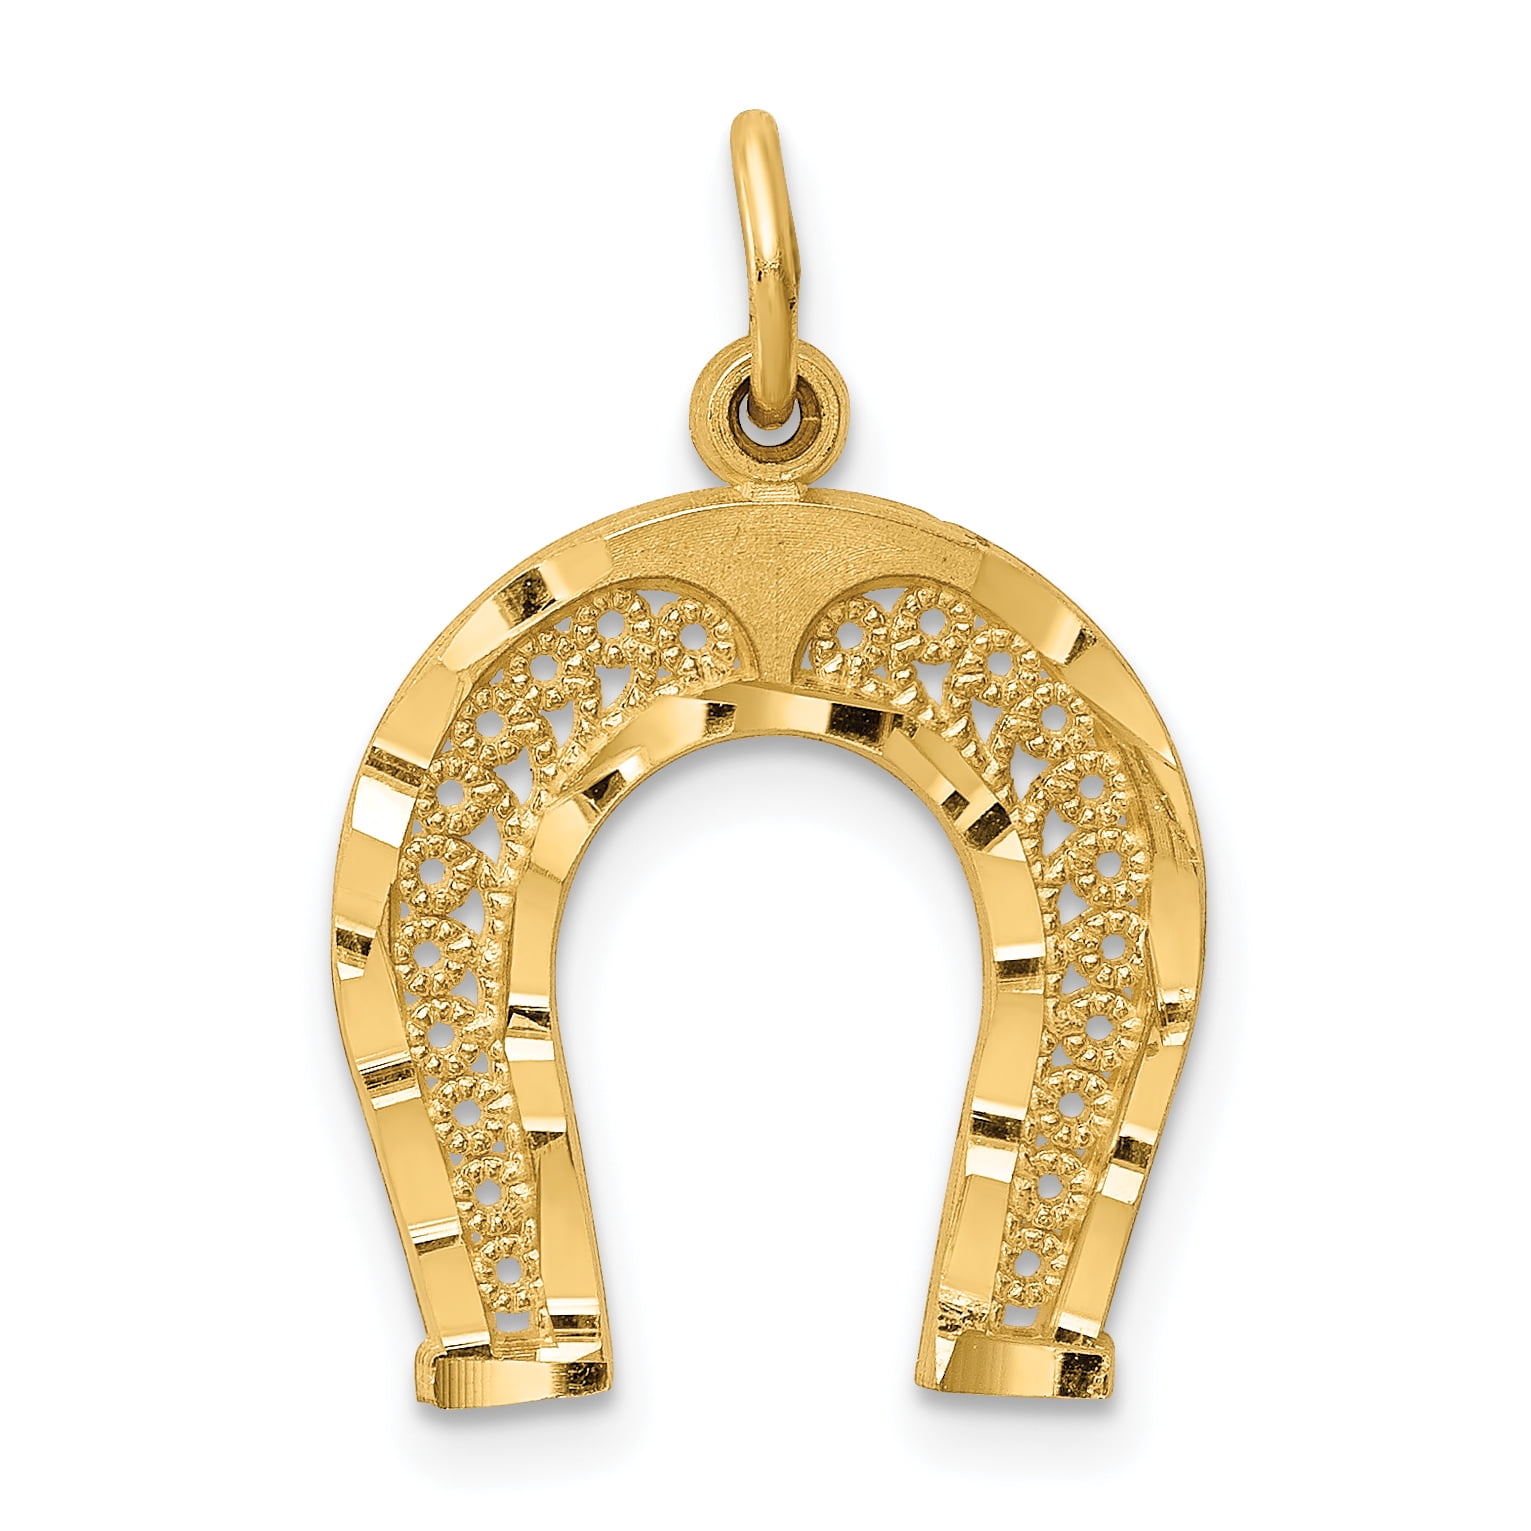 Solid 14K Yellow Gold Good Luck Horseshoe with Horse Head Pendant Necklace